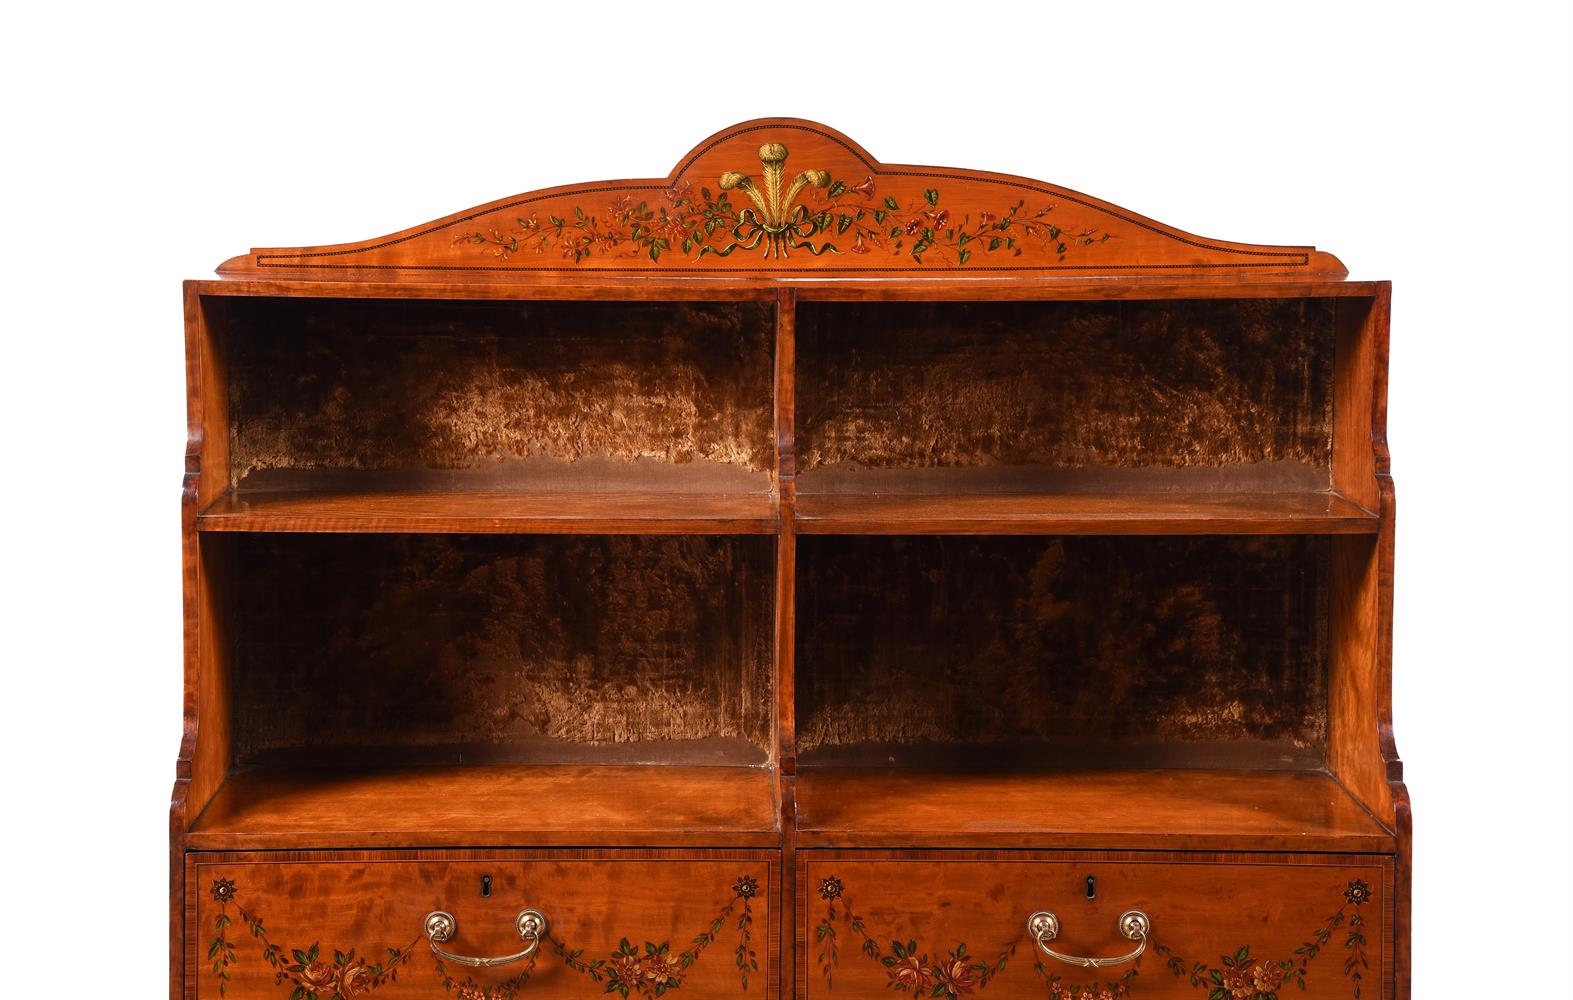 Y A GEORGE III SATINWOOD AND POLYCHROME PAINTED BOOKCASE, LATE 18TH/EARLY 19TH CENTURY - Image 4 of 6